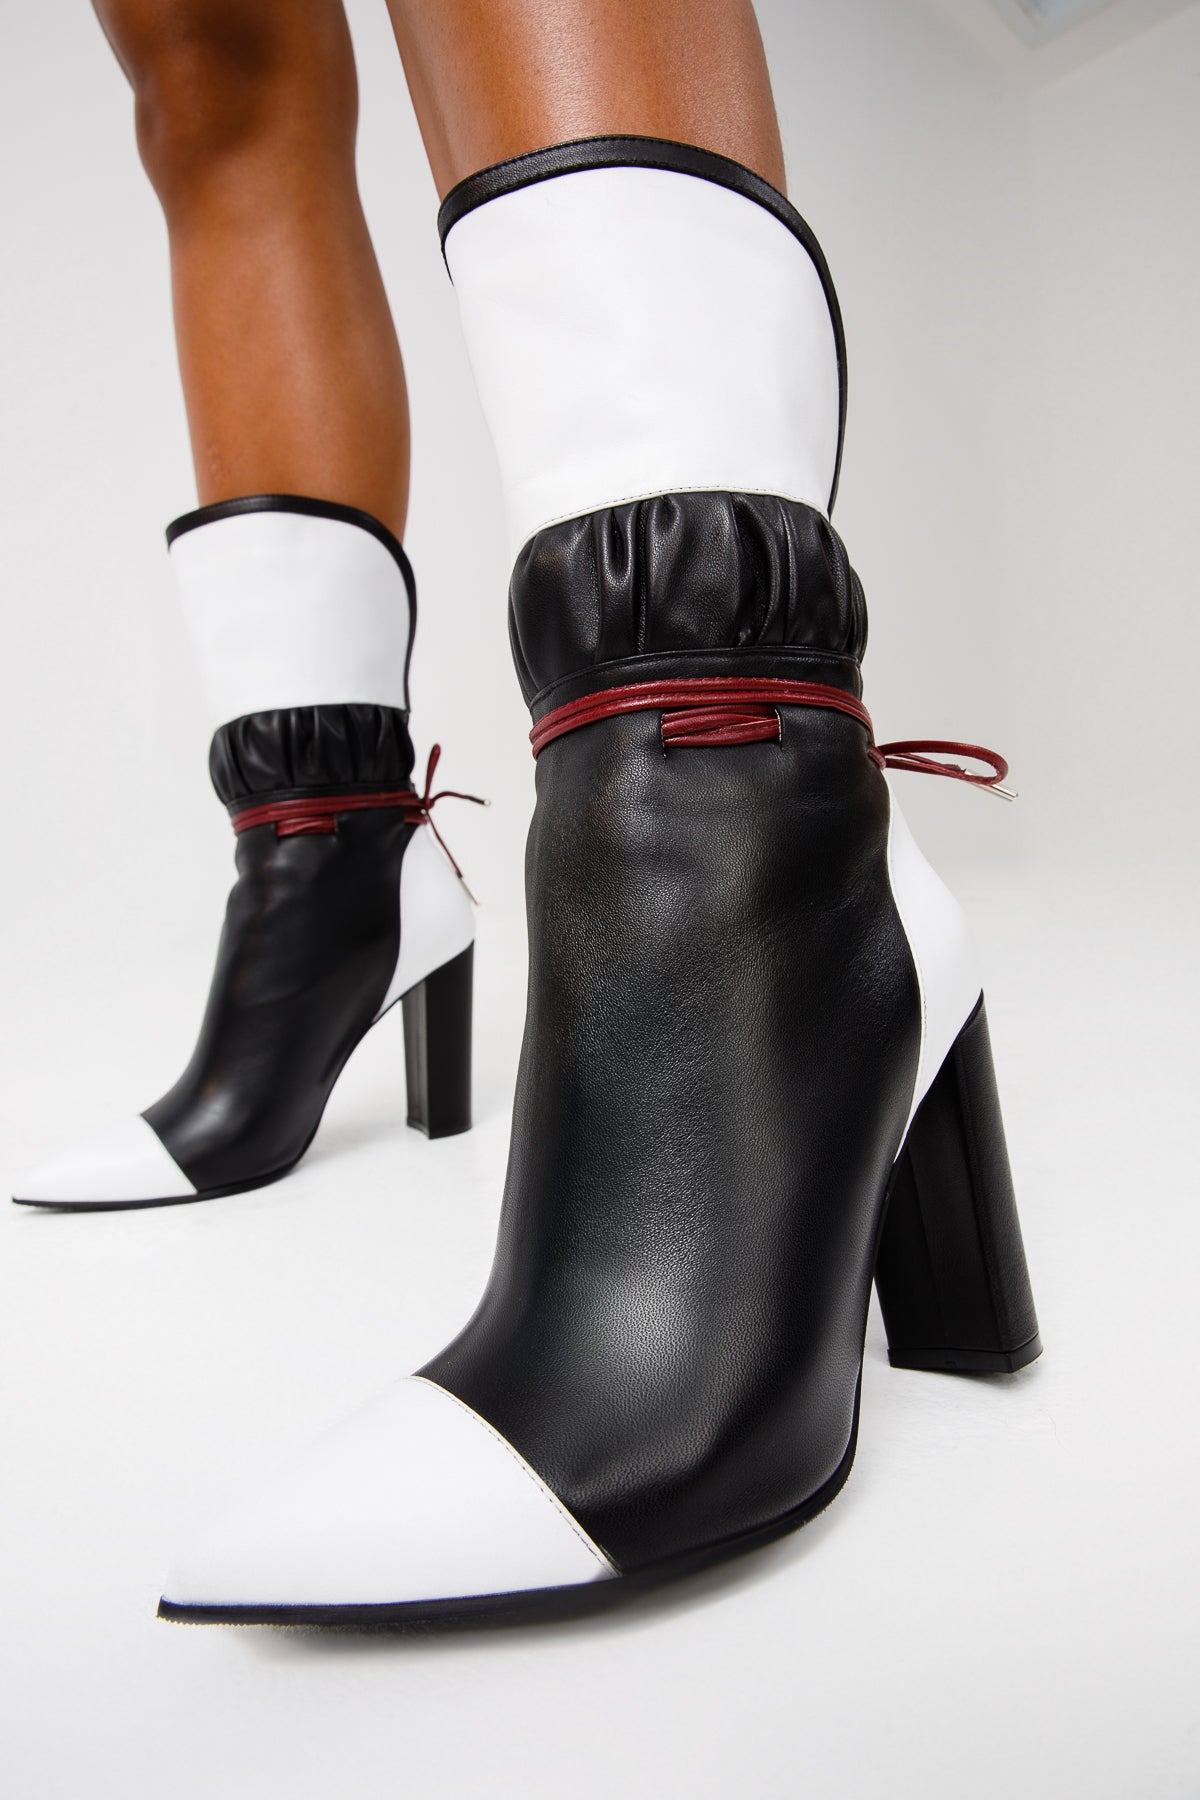 Leather Lucca Women Leather Limited – Shoes Vinci Black & The Calf White Mid Heel High Boot